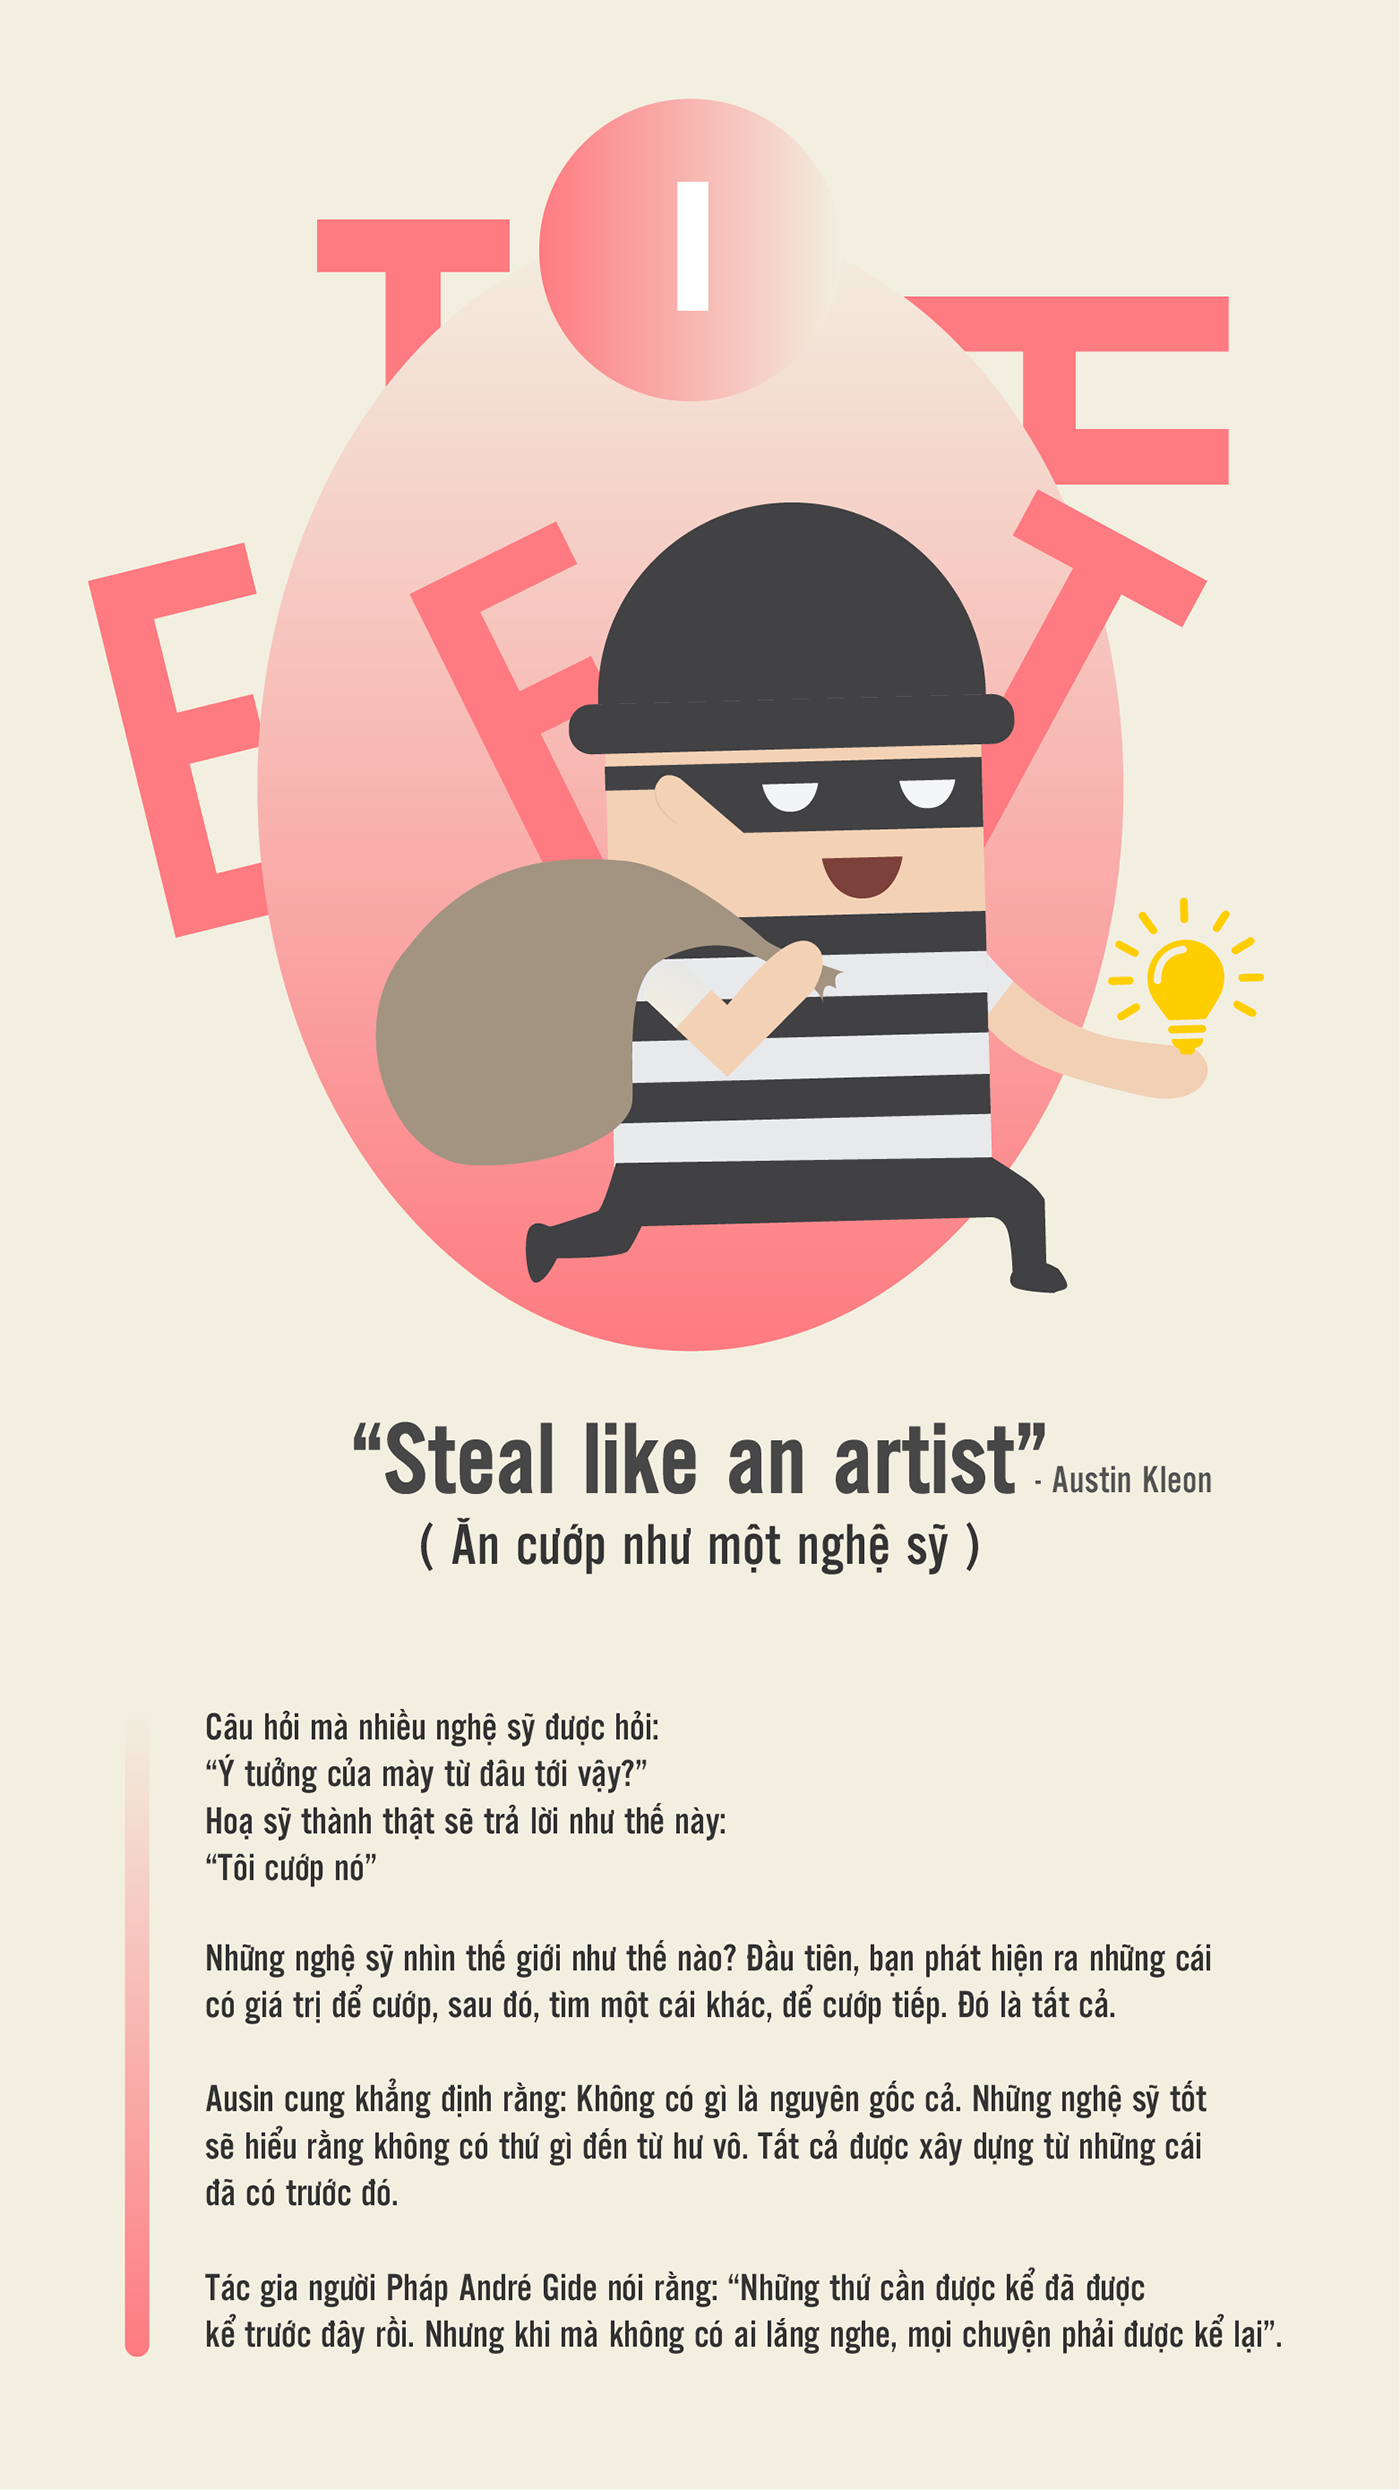 tip tip for design designs 10 tip creative nobody told you about being creative austin kleon steal like an artist